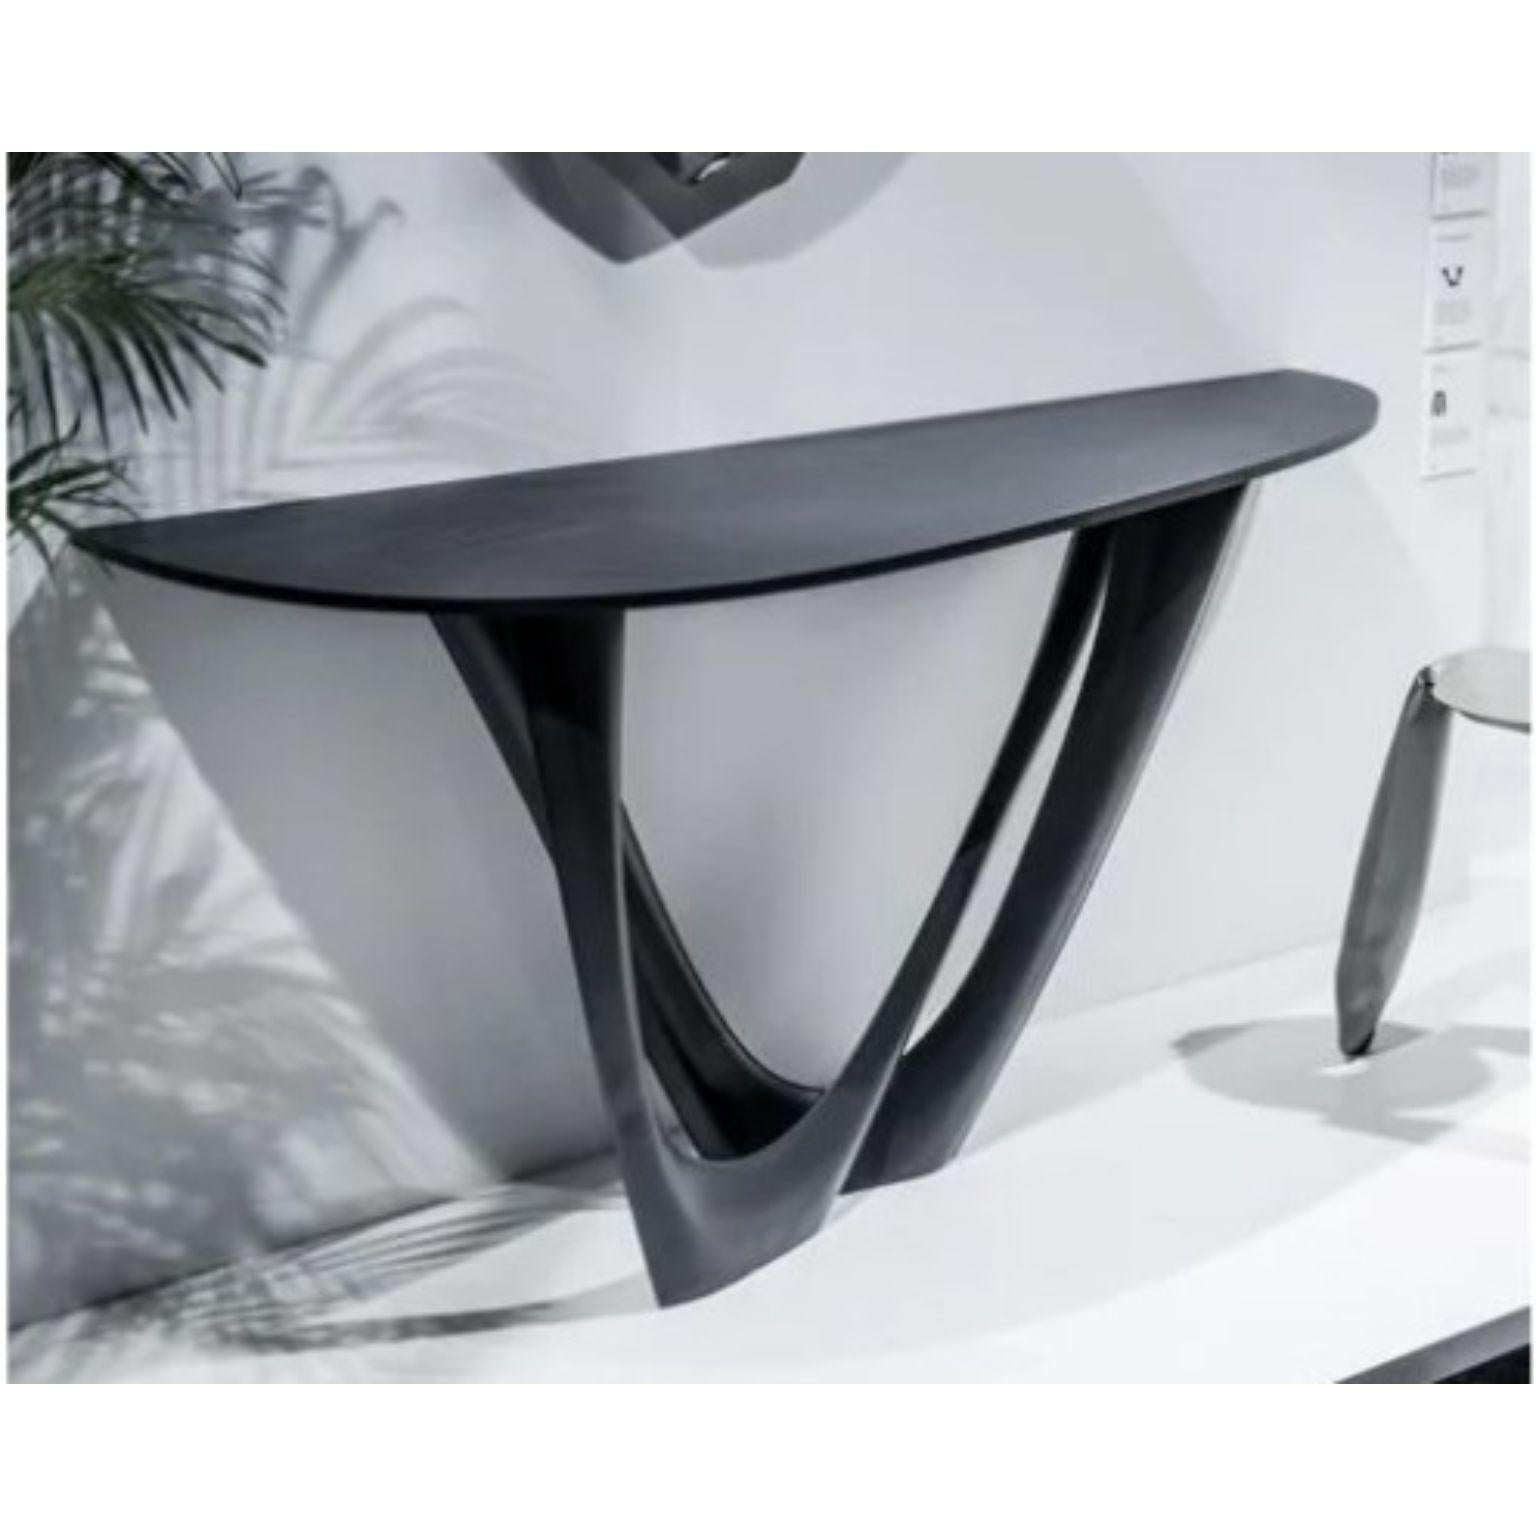 Polish Graphite G-Console Duo Steel Base and Top by Zieta For Sale